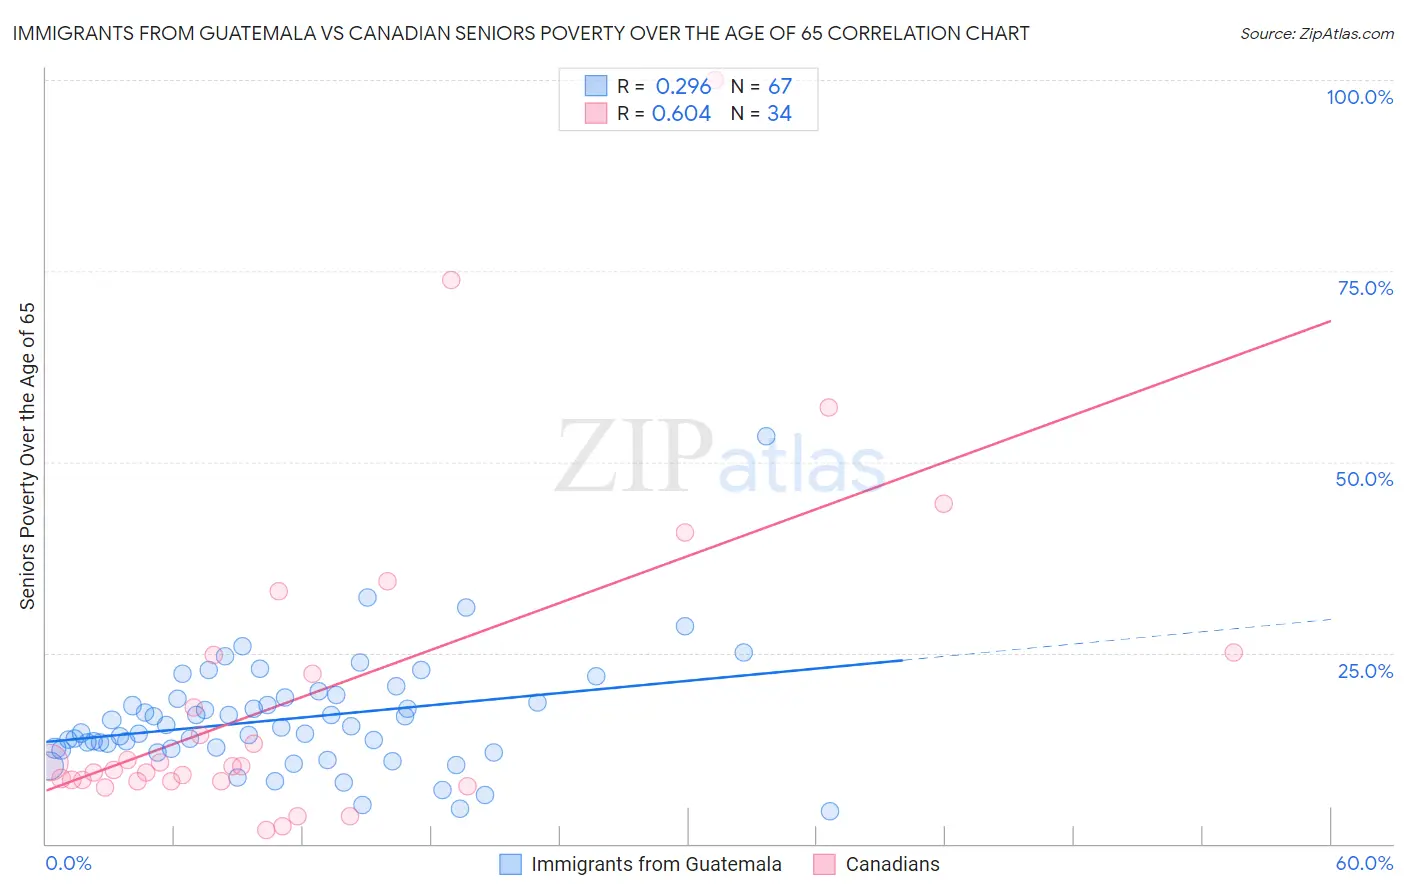 Immigrants from Guatemala vs Canadian Seniors Poverty Over the Age of 65